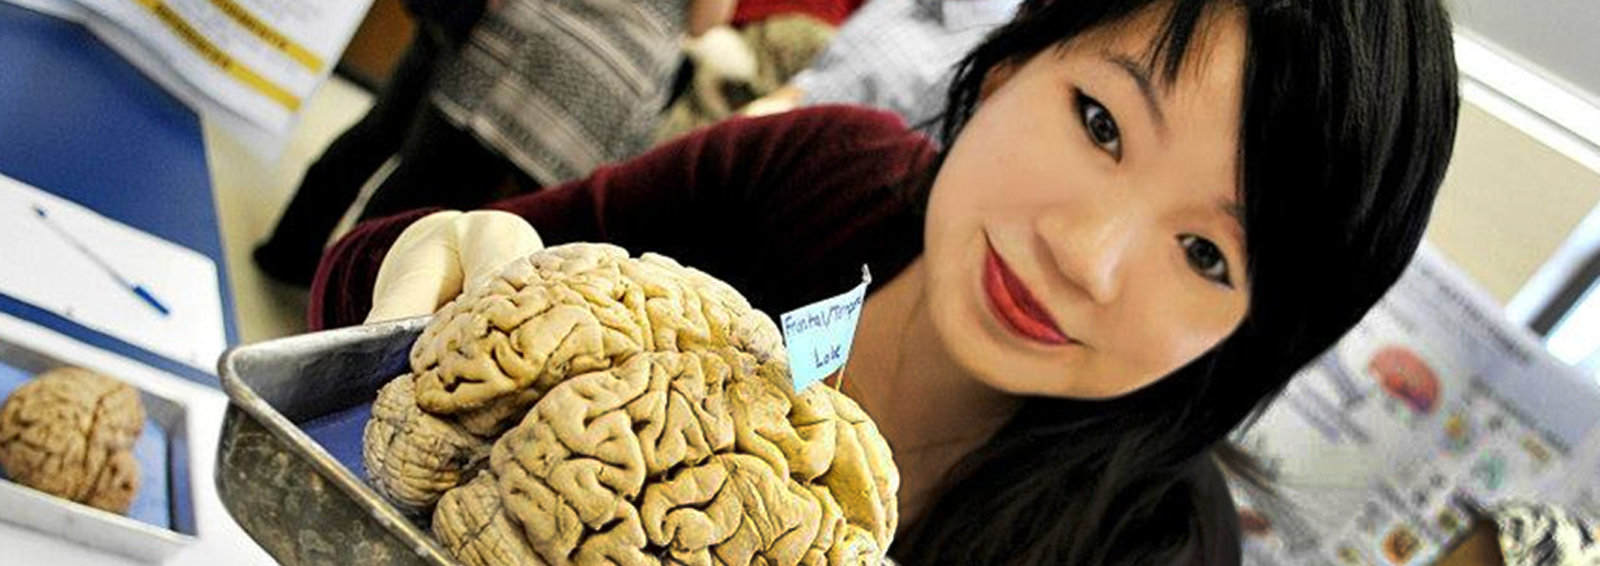 student holding a brain